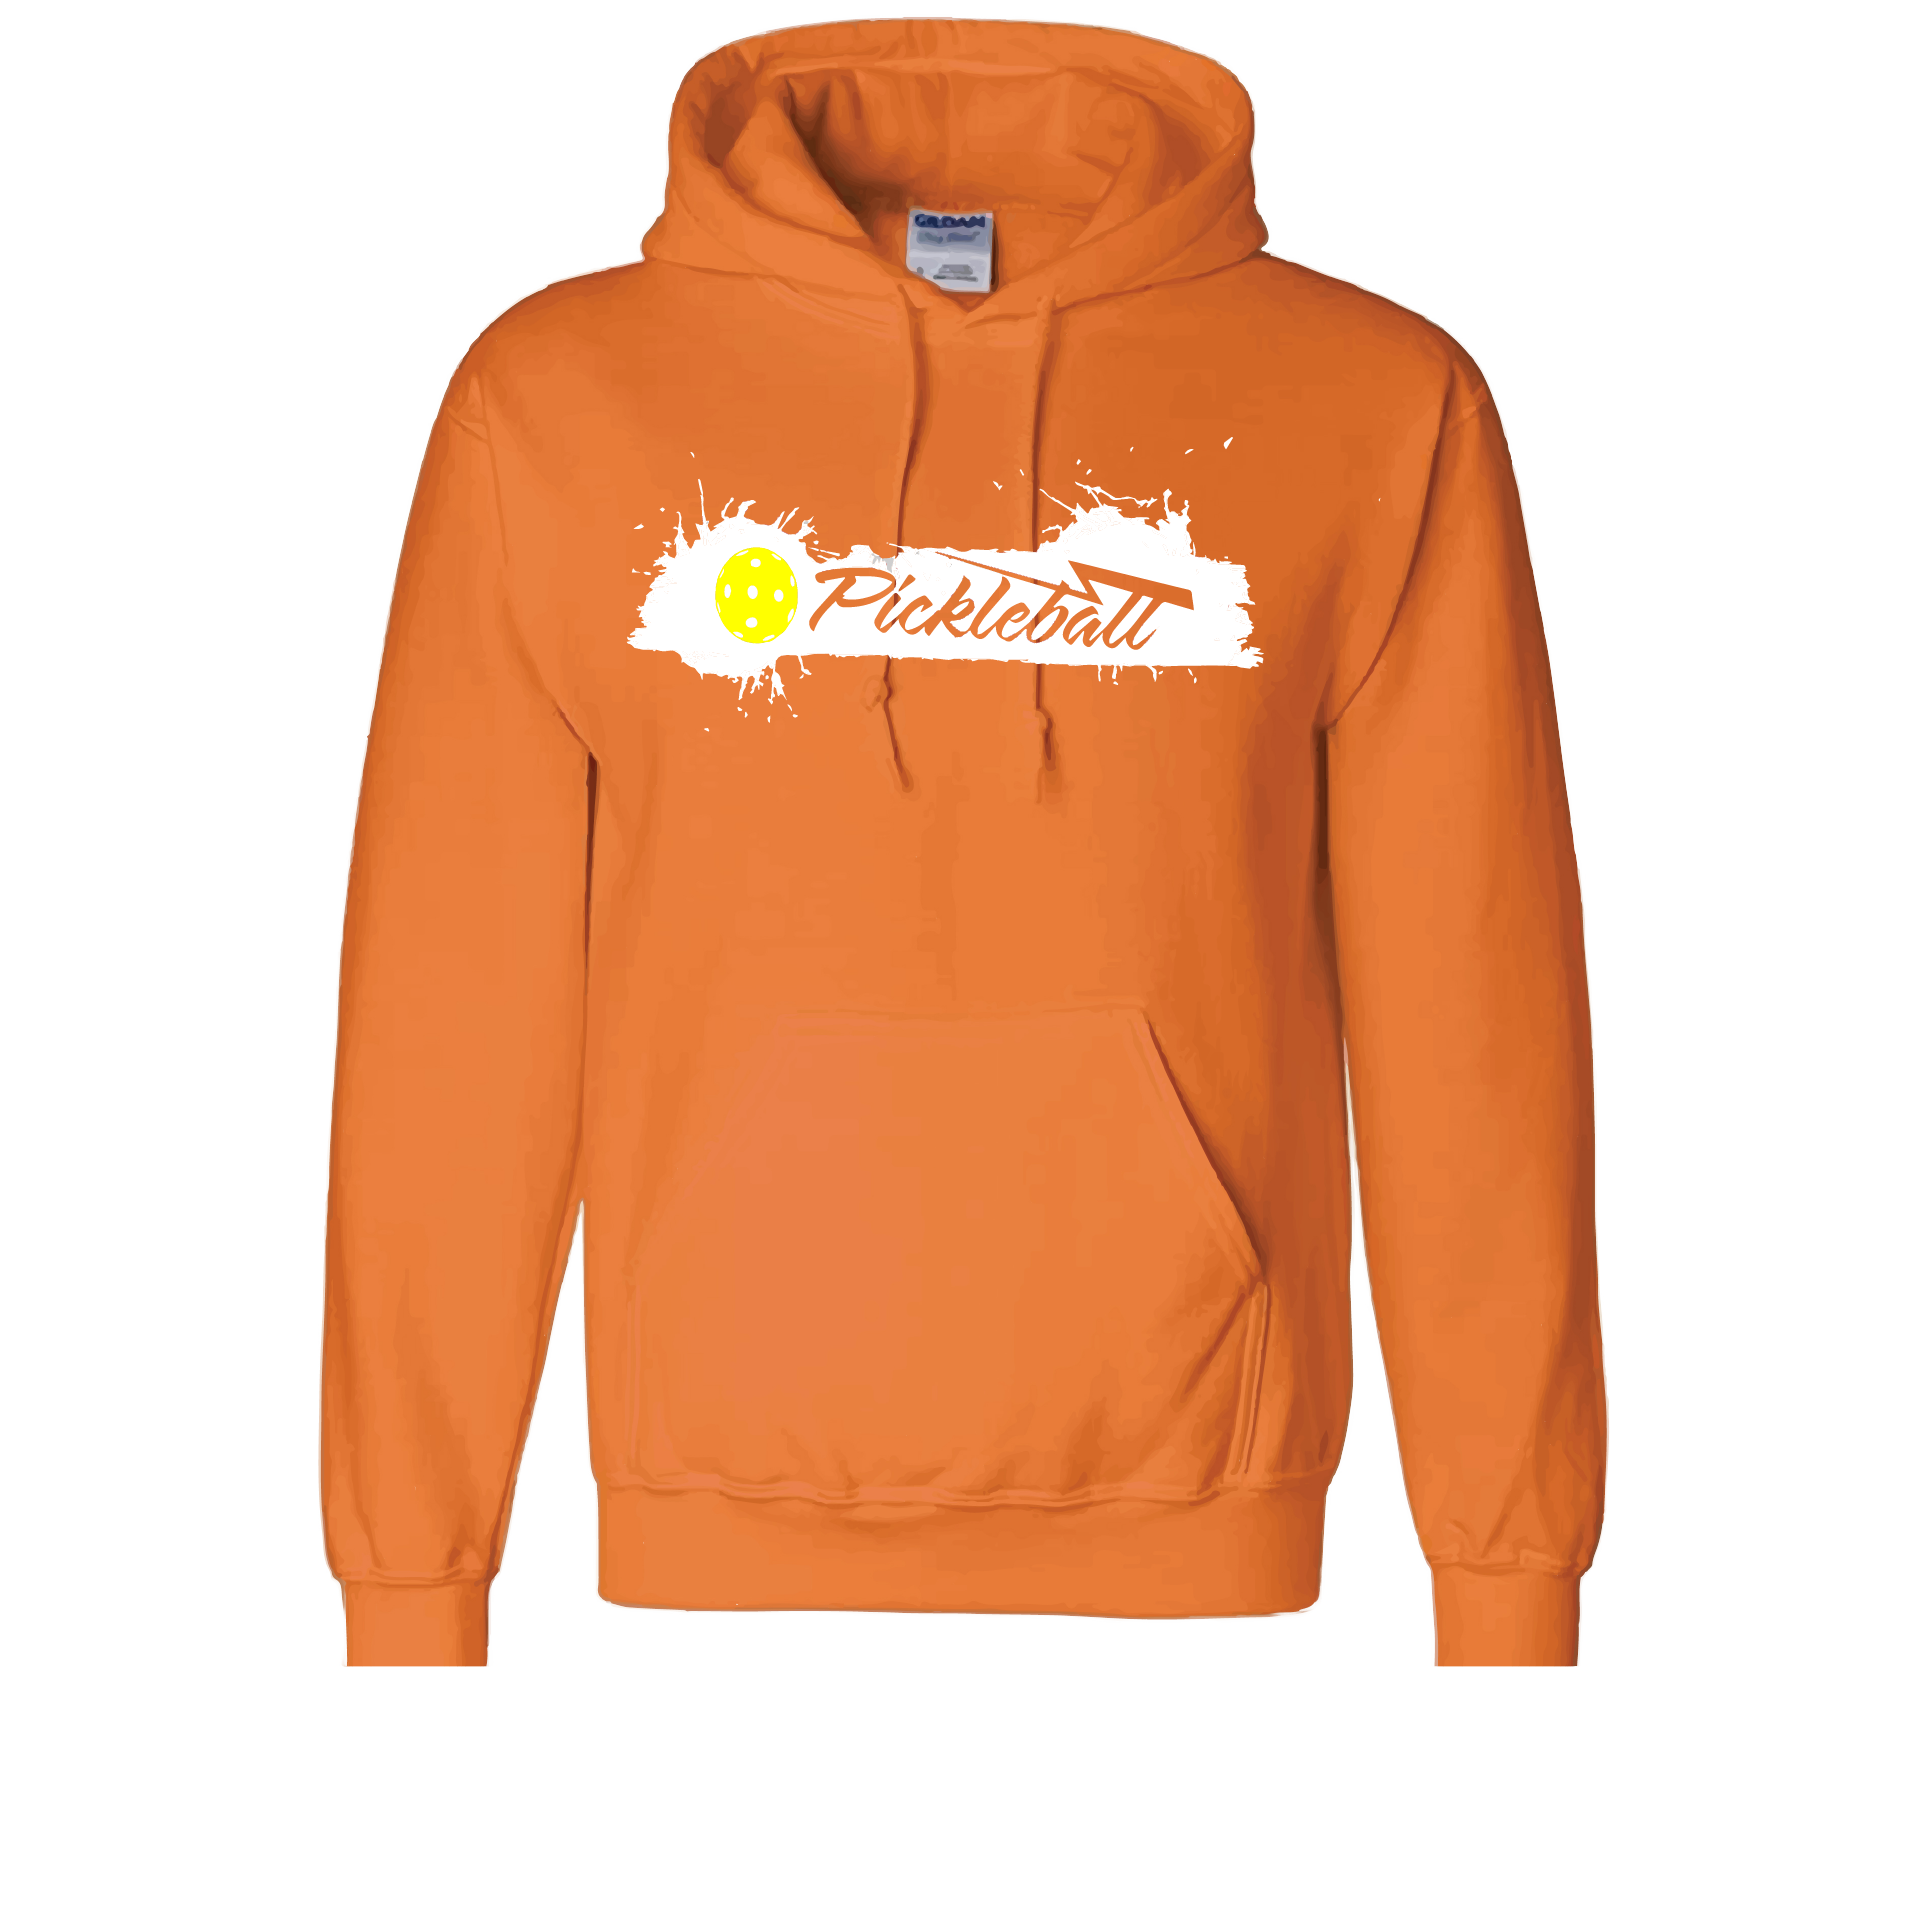 Pickleball Design: Extreme  Unisex Hooded Sweatshirt: Moisture-wicking, double-lined hood, front pouch pocket.  This unisex hooded sweatshirt is ultra comfortable and soft. Stay warm on the Pickleball courts while being that hit with this one of kind design.